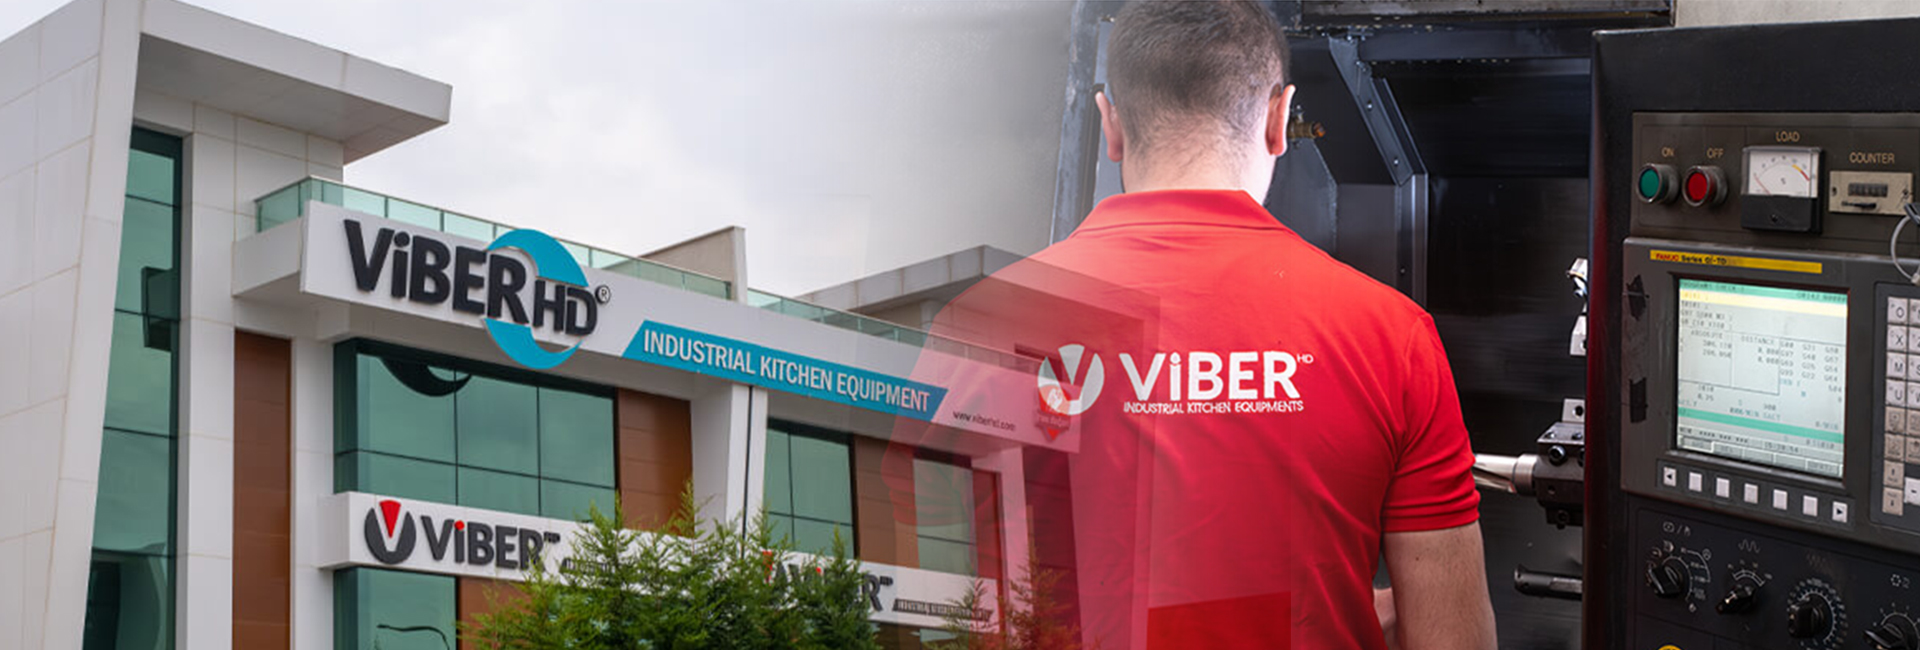 About Us || Viber HD Industrial Kitchen Equipment | Slicers, Grinders, Peelers, Washers, Saws, Meat Grinders, Kneaders, Pastry Rollers, Mixers, Sterilizers